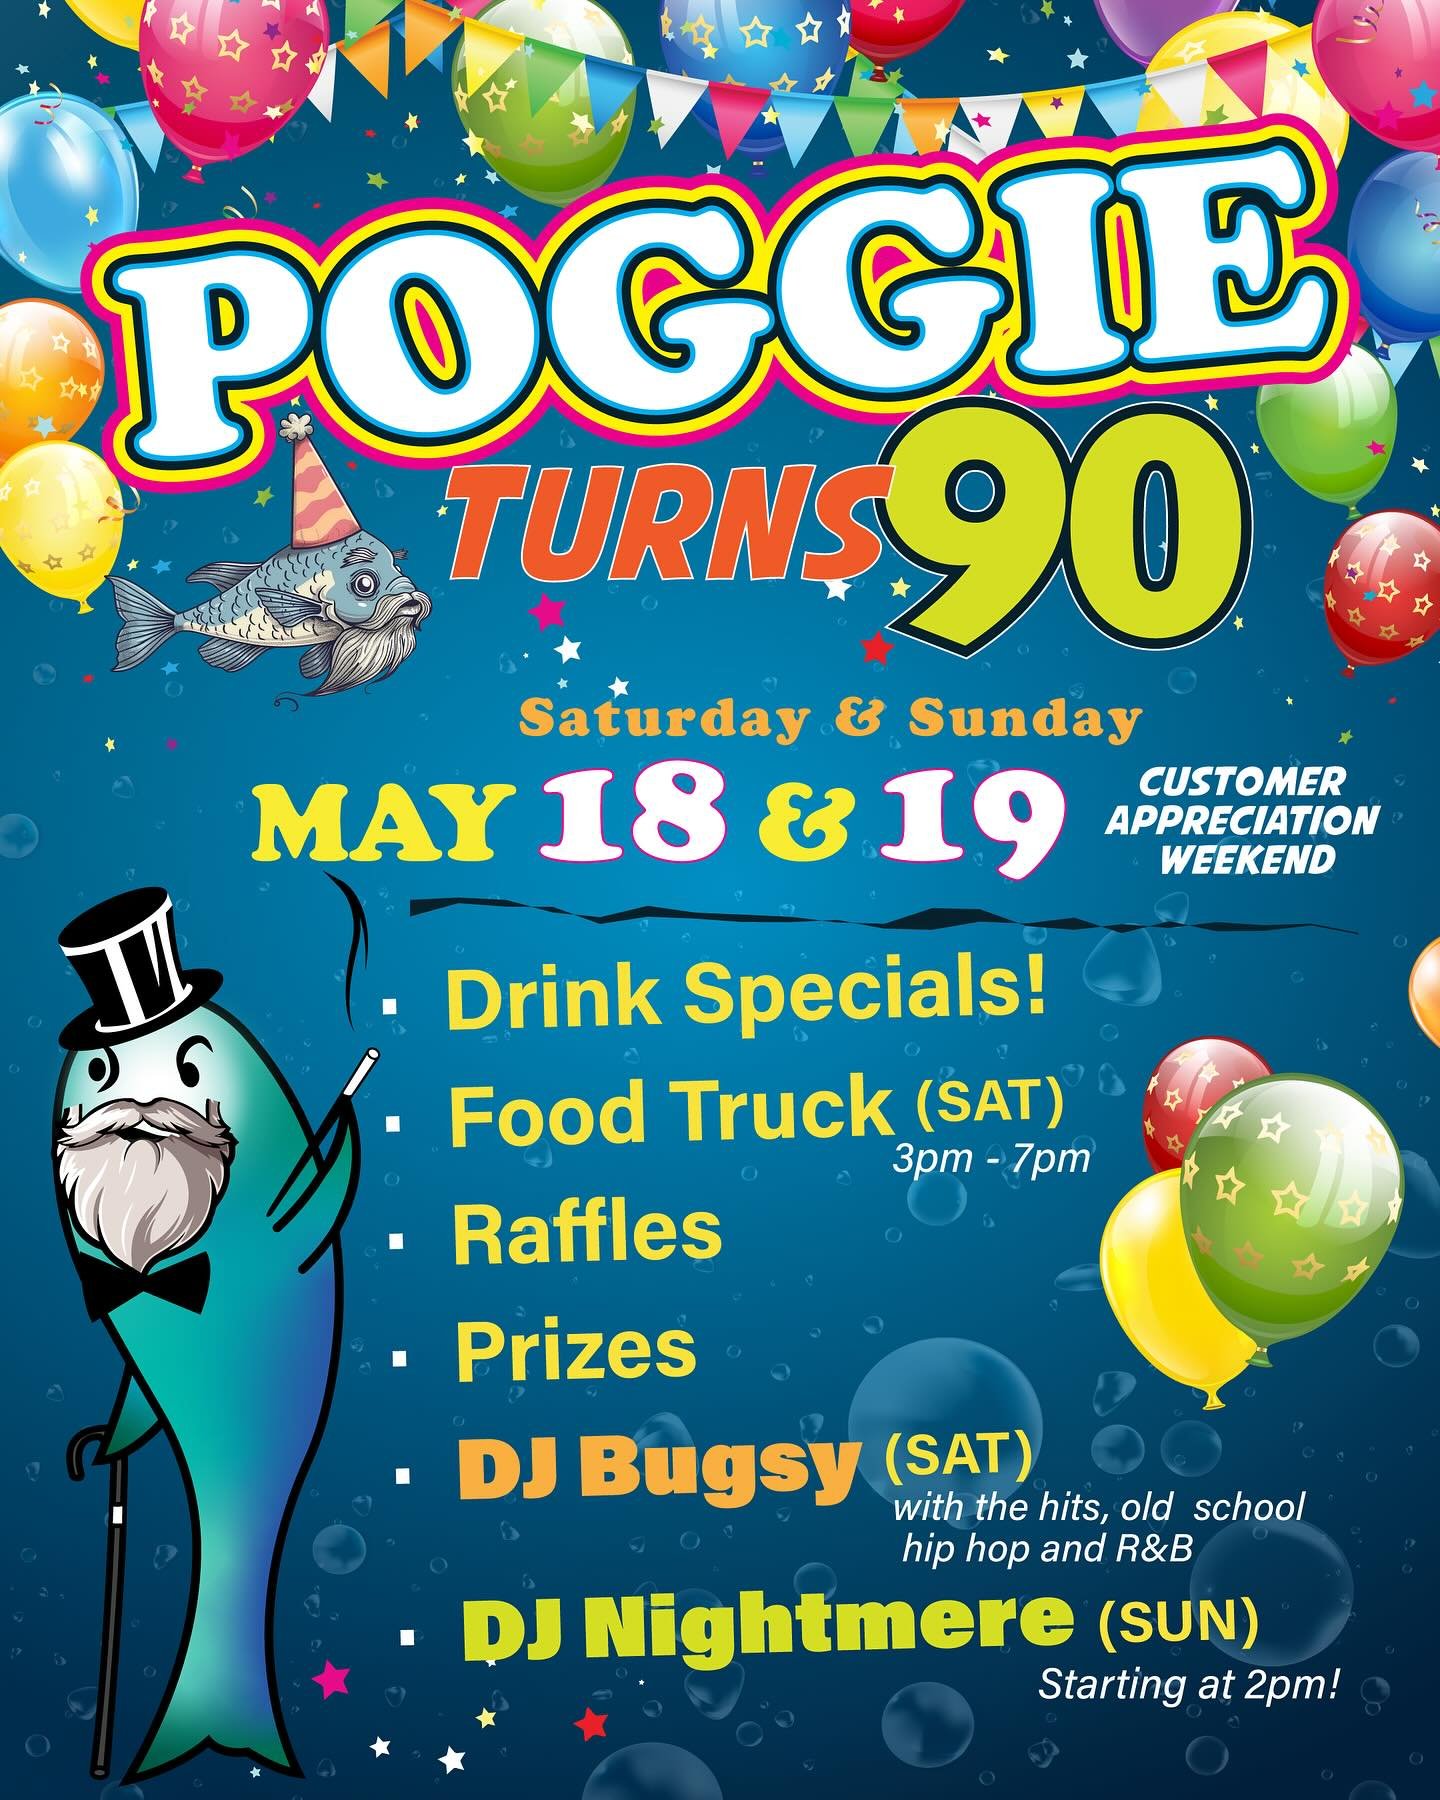 Poggie turns 90! Can you believe it?! Join us for some great music, raffles, specials, and just a grand ol time. What better way to show our appreciation for all of you that keep coming back. Not only are we celebrating Seymour Poggie, but we are cel